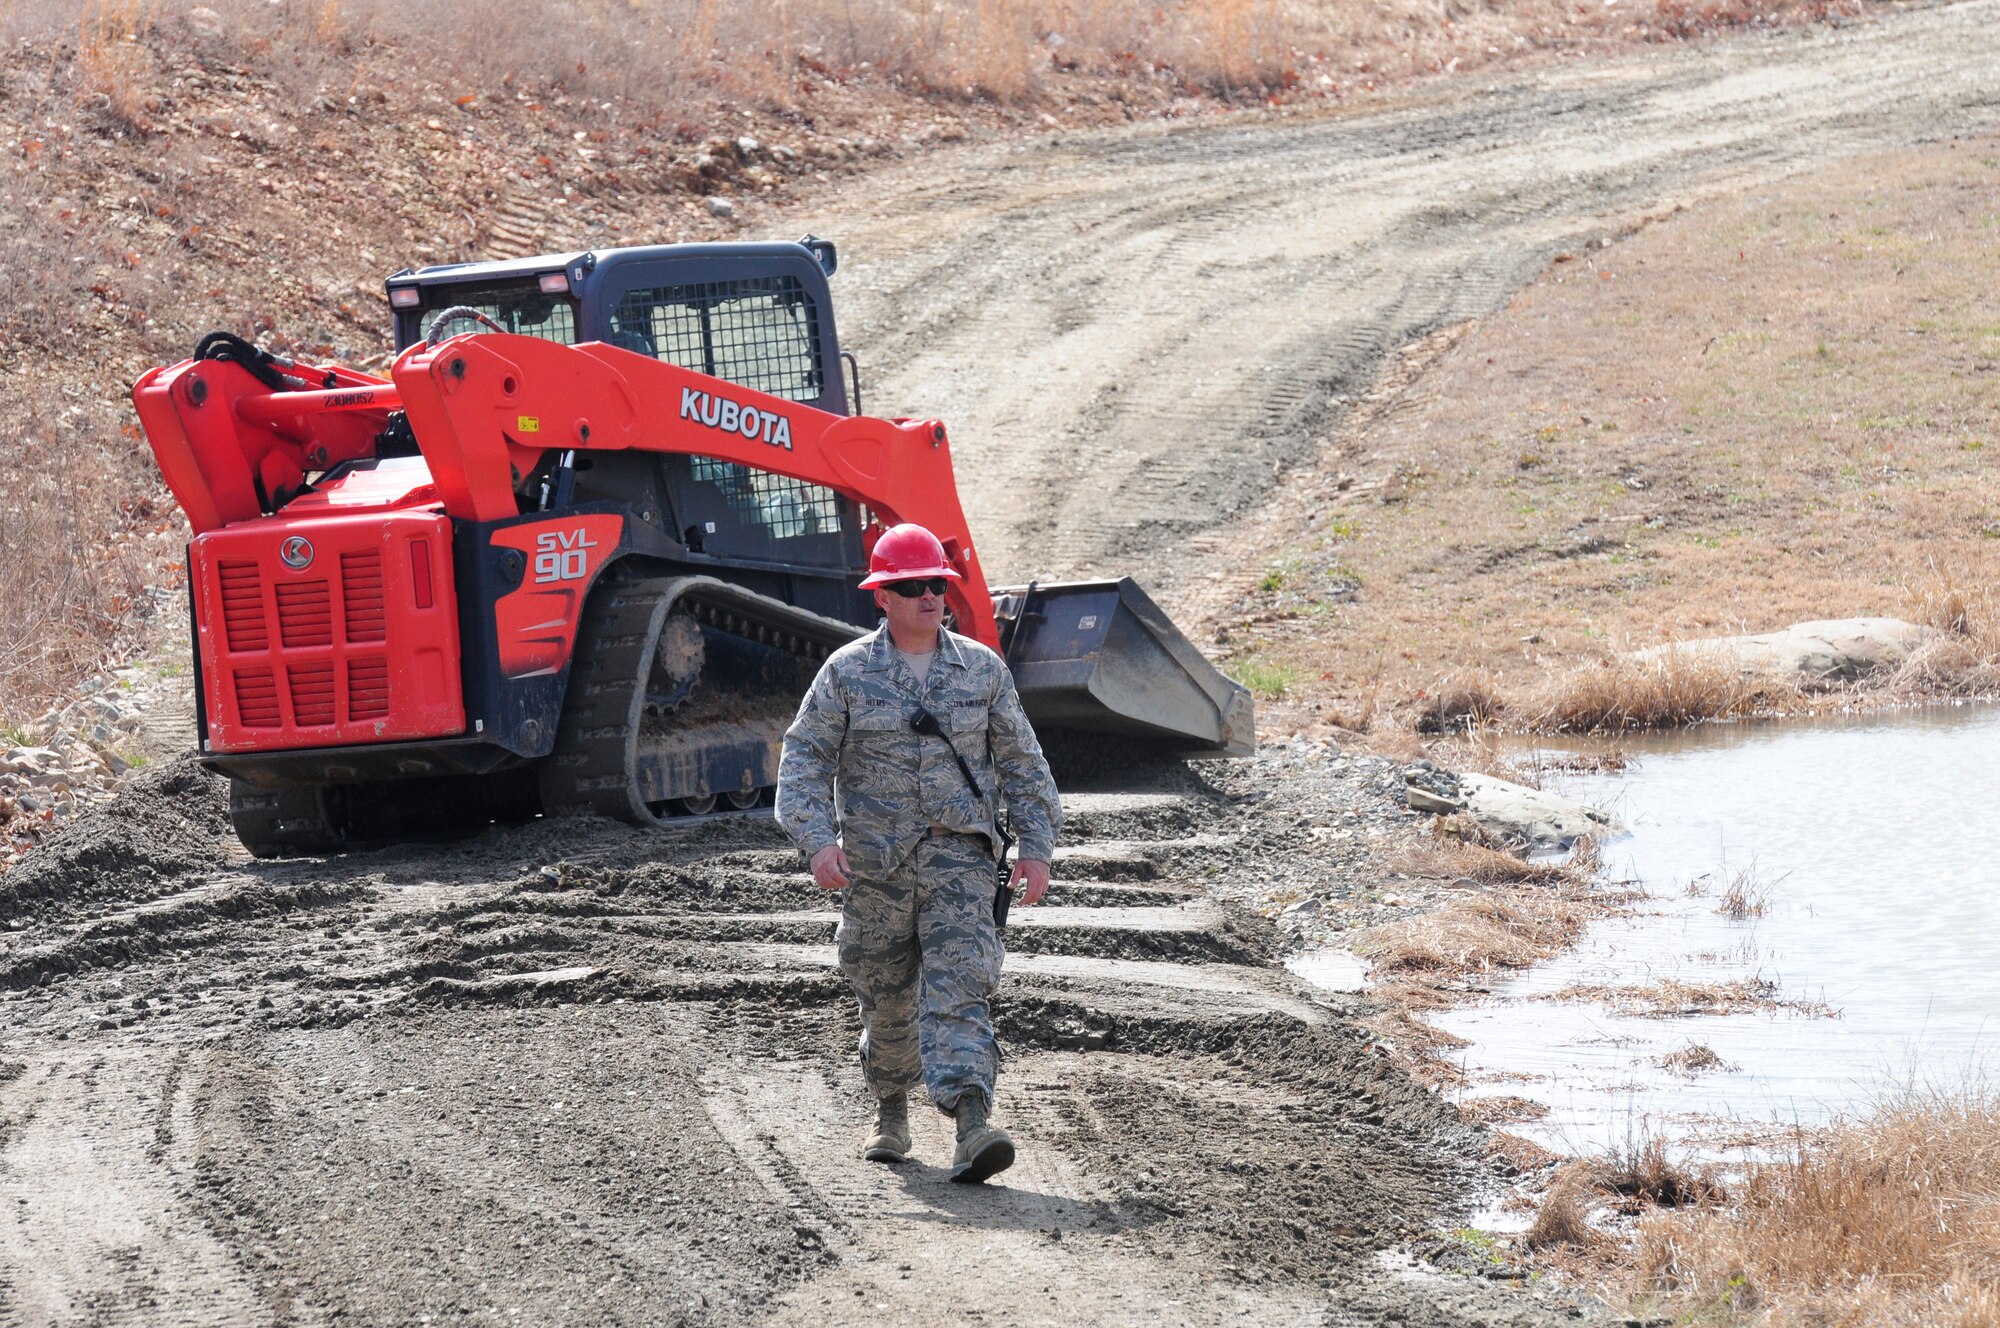 U.S. Air Force Master Sgt. Ronald F. Helms, Jr., 145th Civil Engineer Squadron, returns to “tent city” area after inspecting repairs of washed out road at the 145 CES Regional Training Site, New London, N.C., March 4, 2015. This real-world incident was carried out in order to allow access to the force beddown area where over 200 military and civilian personal will call home during Vigilant Guard 2015. Vigilant Guard is an exercise that provides an opportunity for Army and Air National Guard, North Carolina Emergency Management and county civilian partners to come together to train as true partners in order to respond effectively to natural disasters. (U.S. Air National Guard photo by Master Sgt. Patricia F. Moran, 145th Public Affairs/Released)